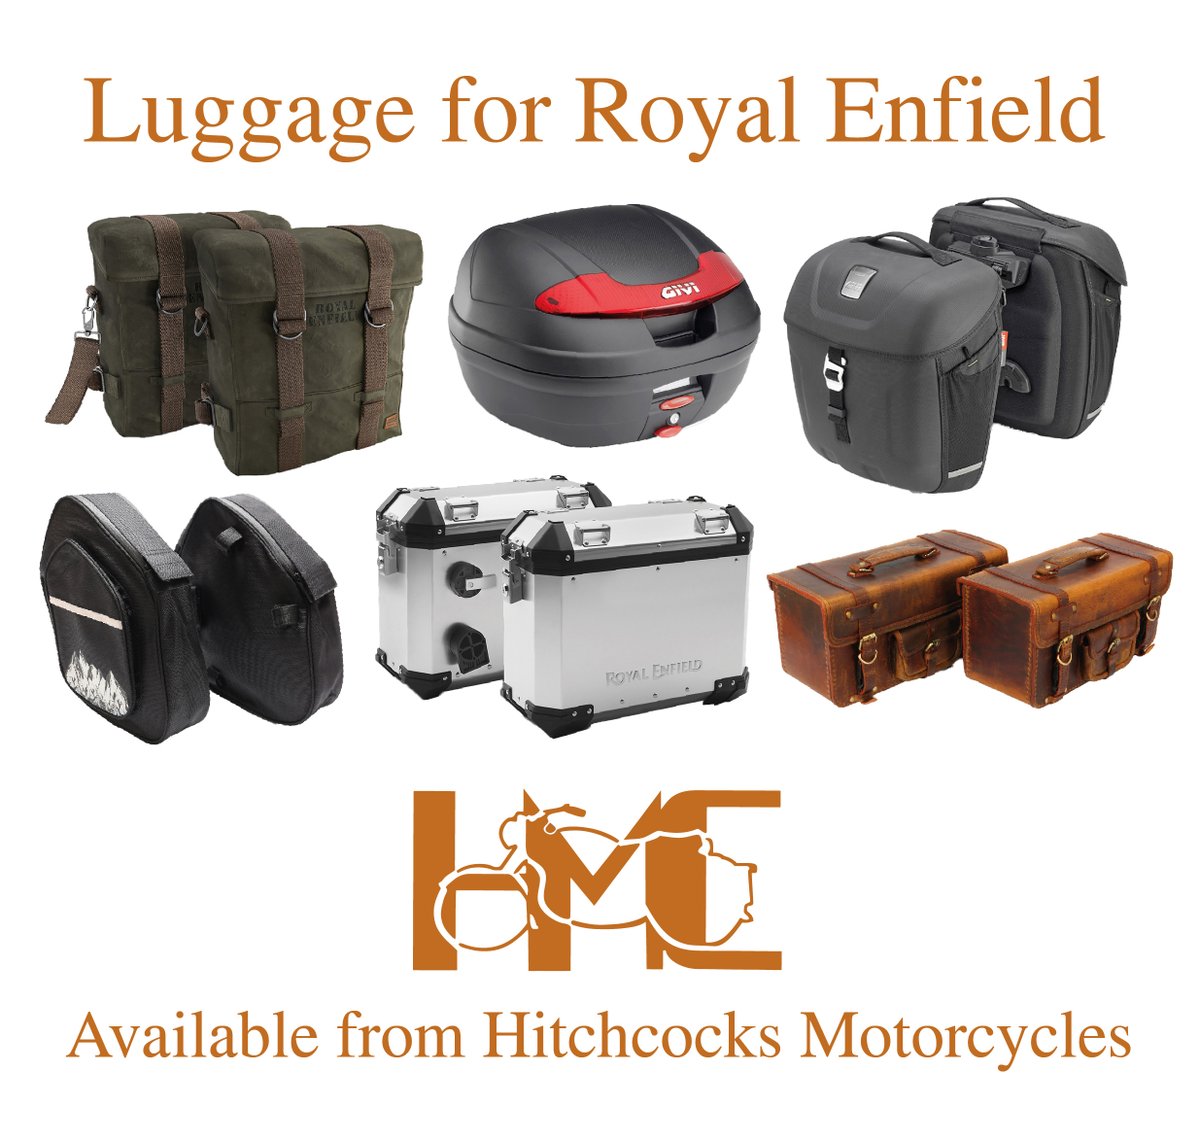 Luggage for Royal Enfield Motorcycles #RoyalEnfield #hunter #interceptor #meteor #bullet #himalayan #continentalGT #350classicreborn #scram #supermeteor #clipper #crusader #tailpack #givi #motorcycleluggage #tankbag #panniers #toolroll #topbox #luggage #rearcarrier #pannierframes